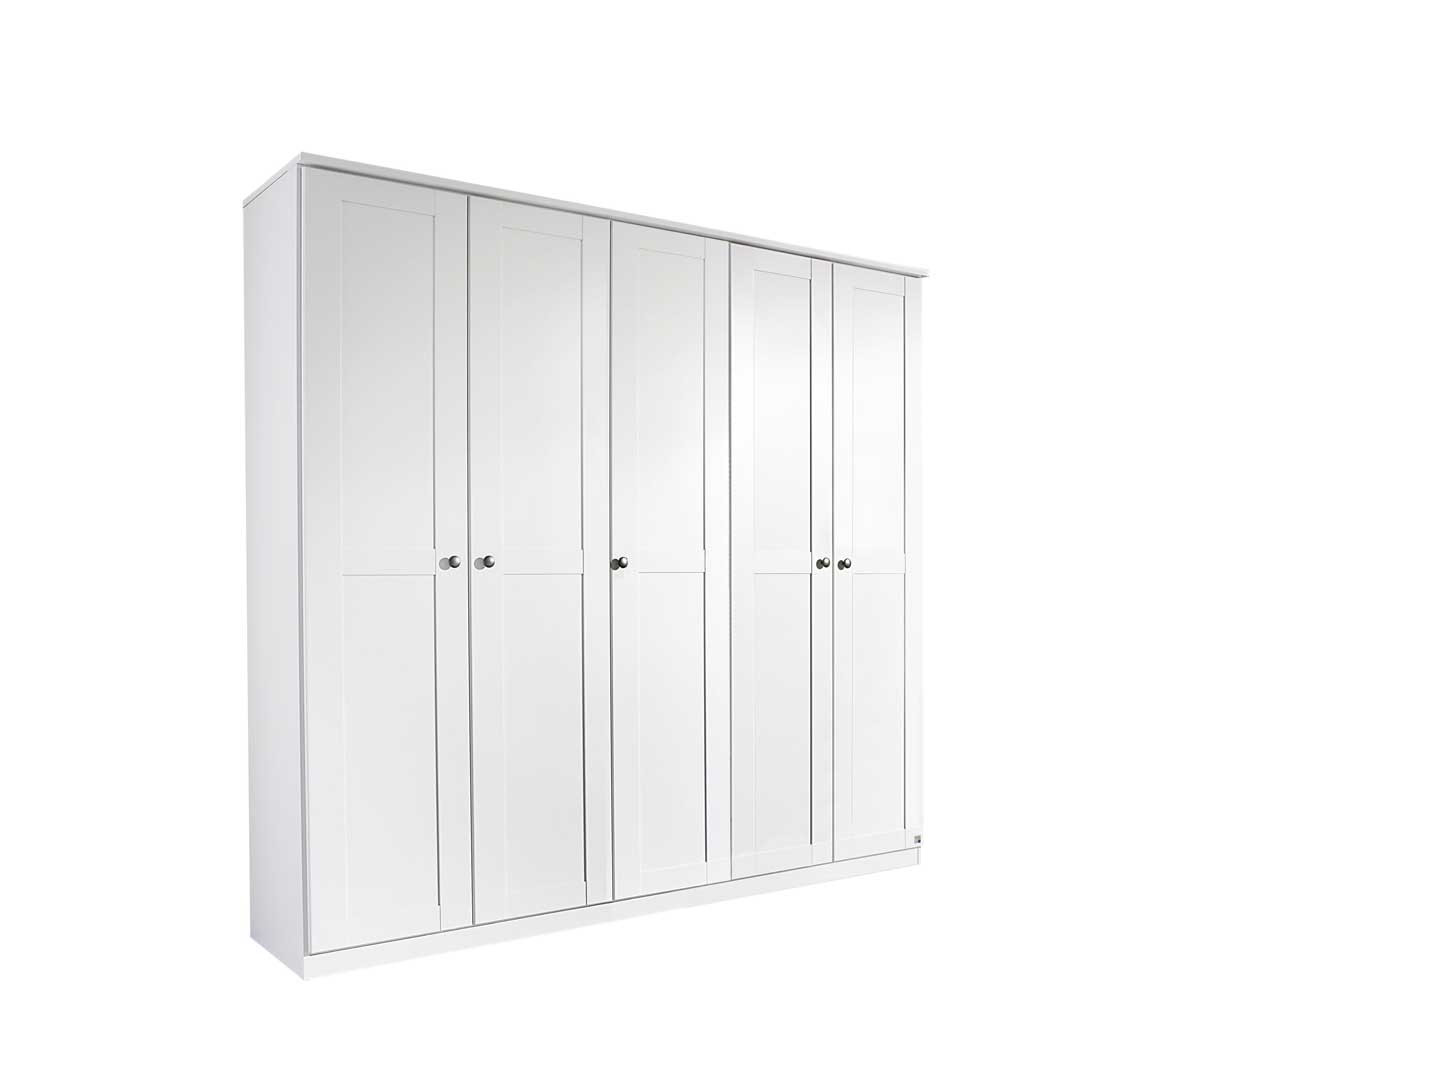 Armoire adulte blanche 226 cm style campagne Rosemarie